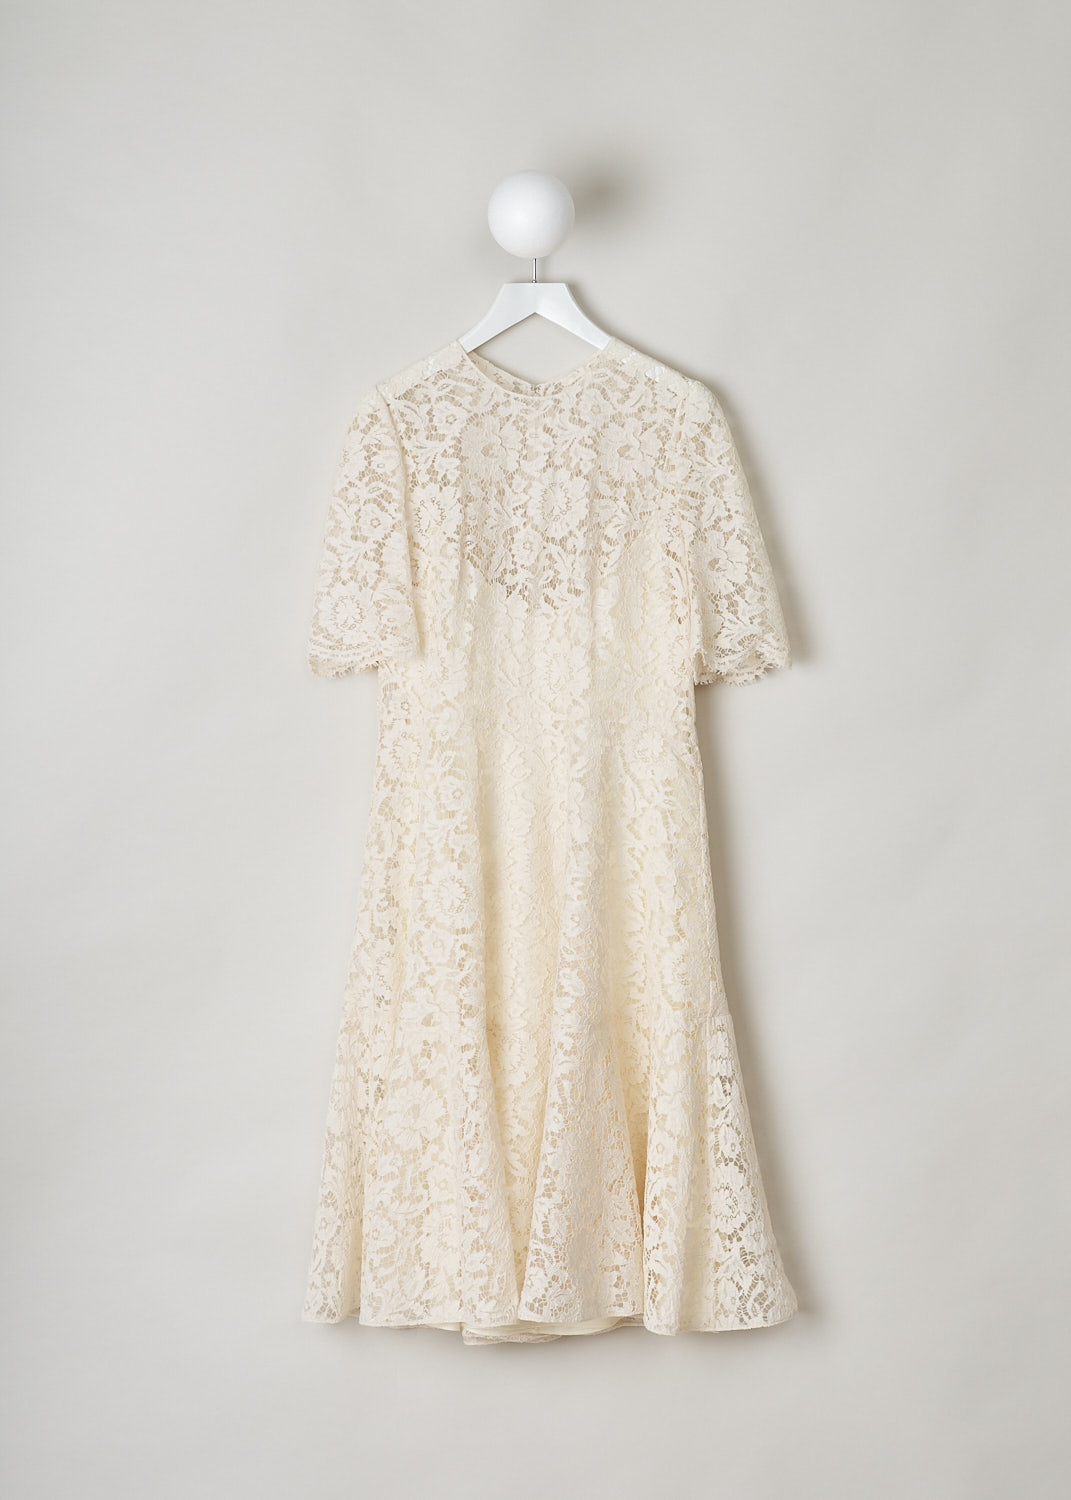 VALENTINO, WHITE LACE MIDI DRESS, SB0VAPH01EC_A03, White, Front, This white midi dress has a fitted short sleeve bodice with a round neckline. A straight seam runs along the waist. The flared A-line skirt has a straight hems. An invisible zip in the back functions as the closure option. The dress is lined with a light colored tulle and has a slip dress sewn in.
